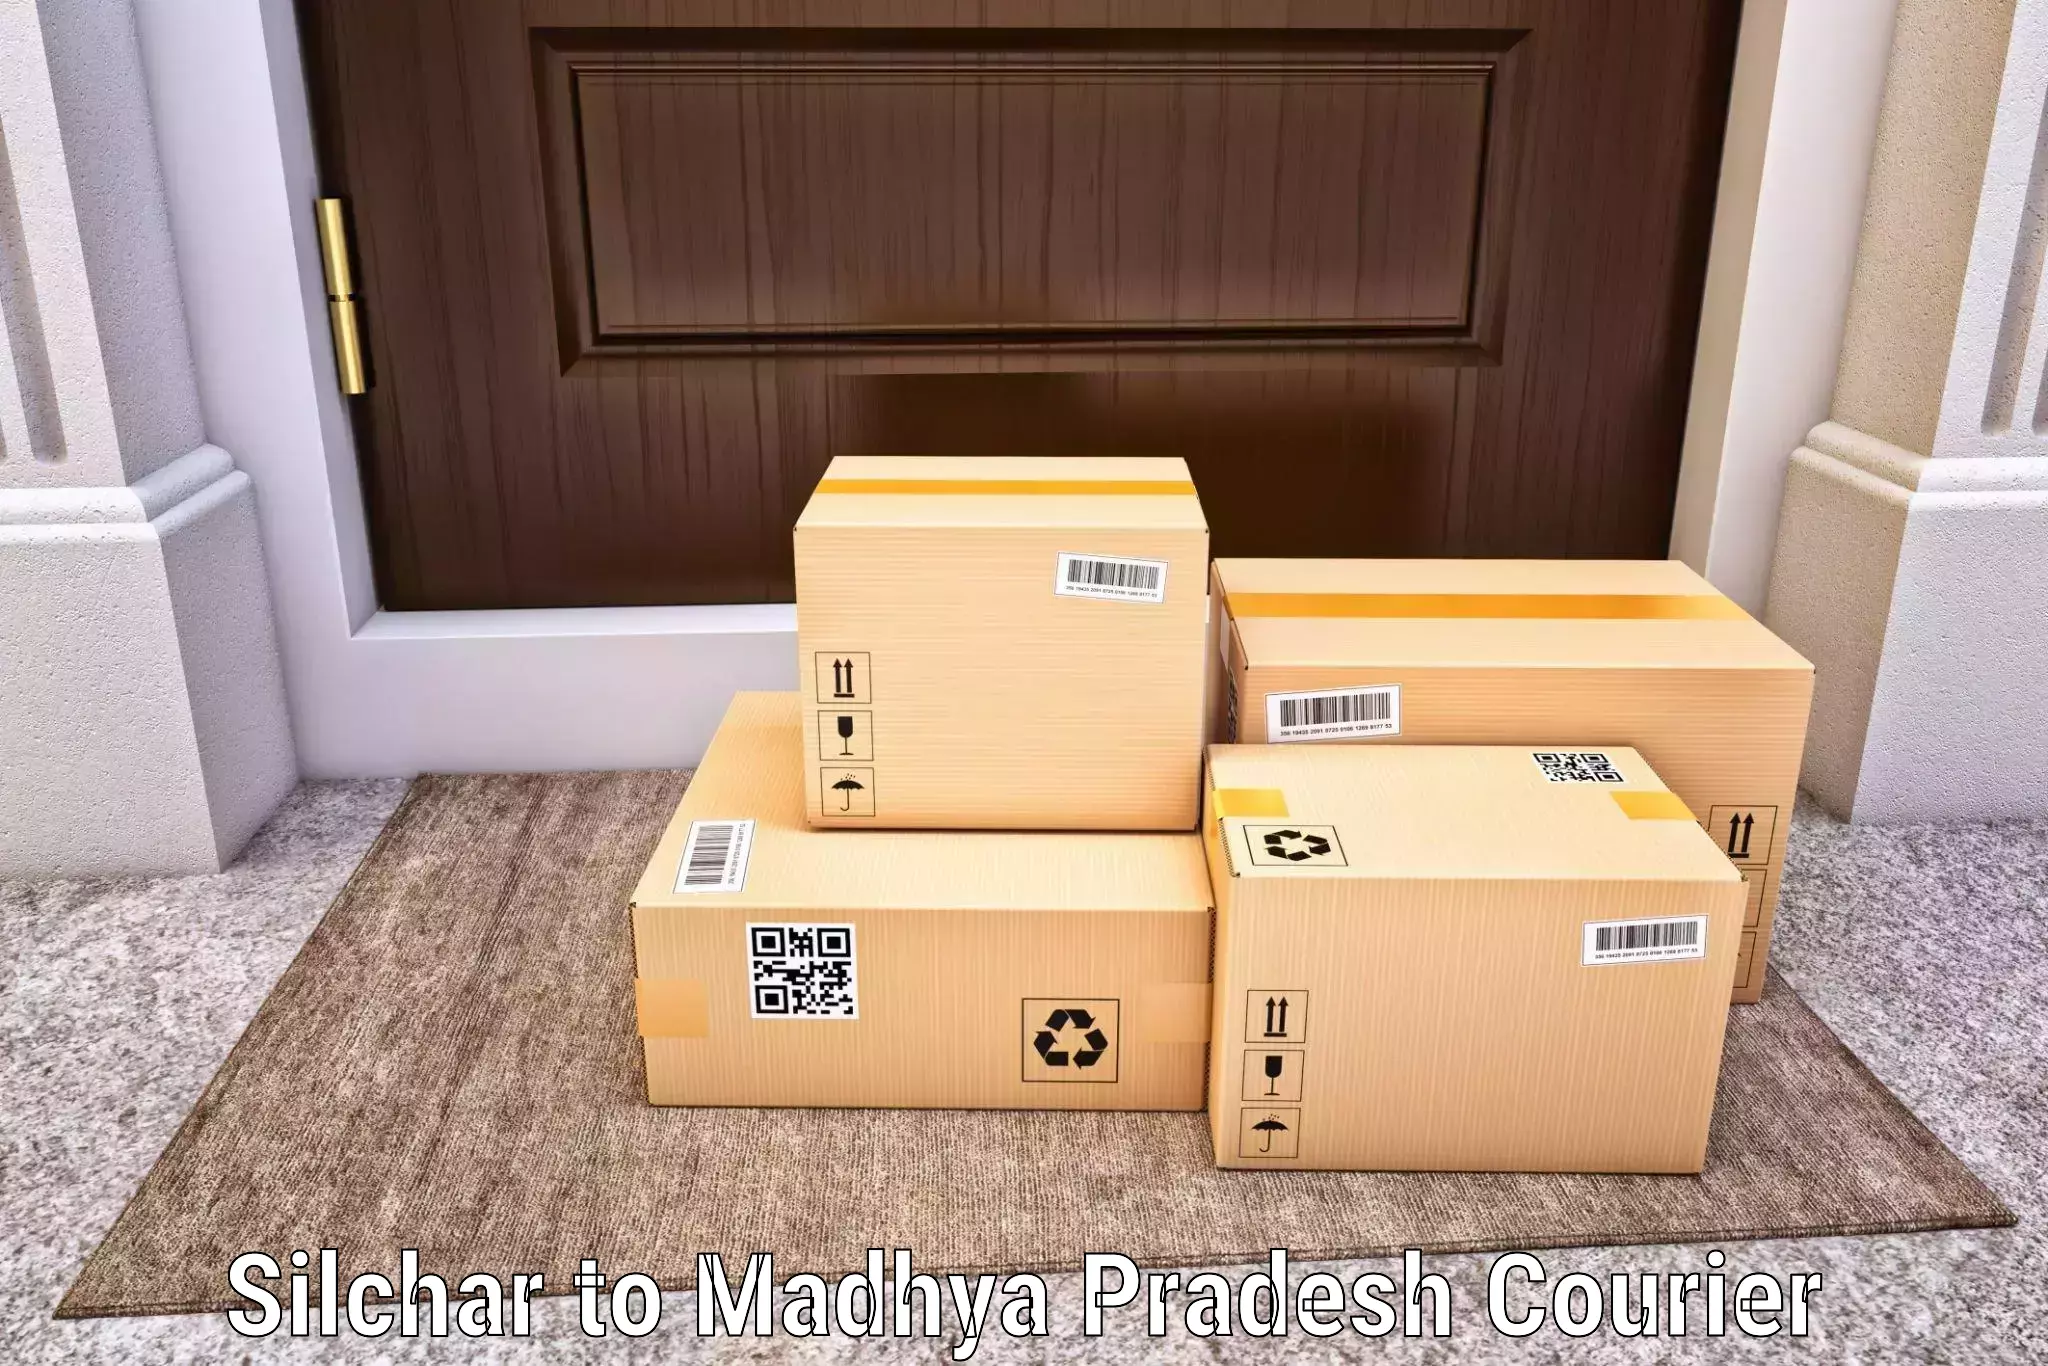 Automated parcel services Silchar to Maihar